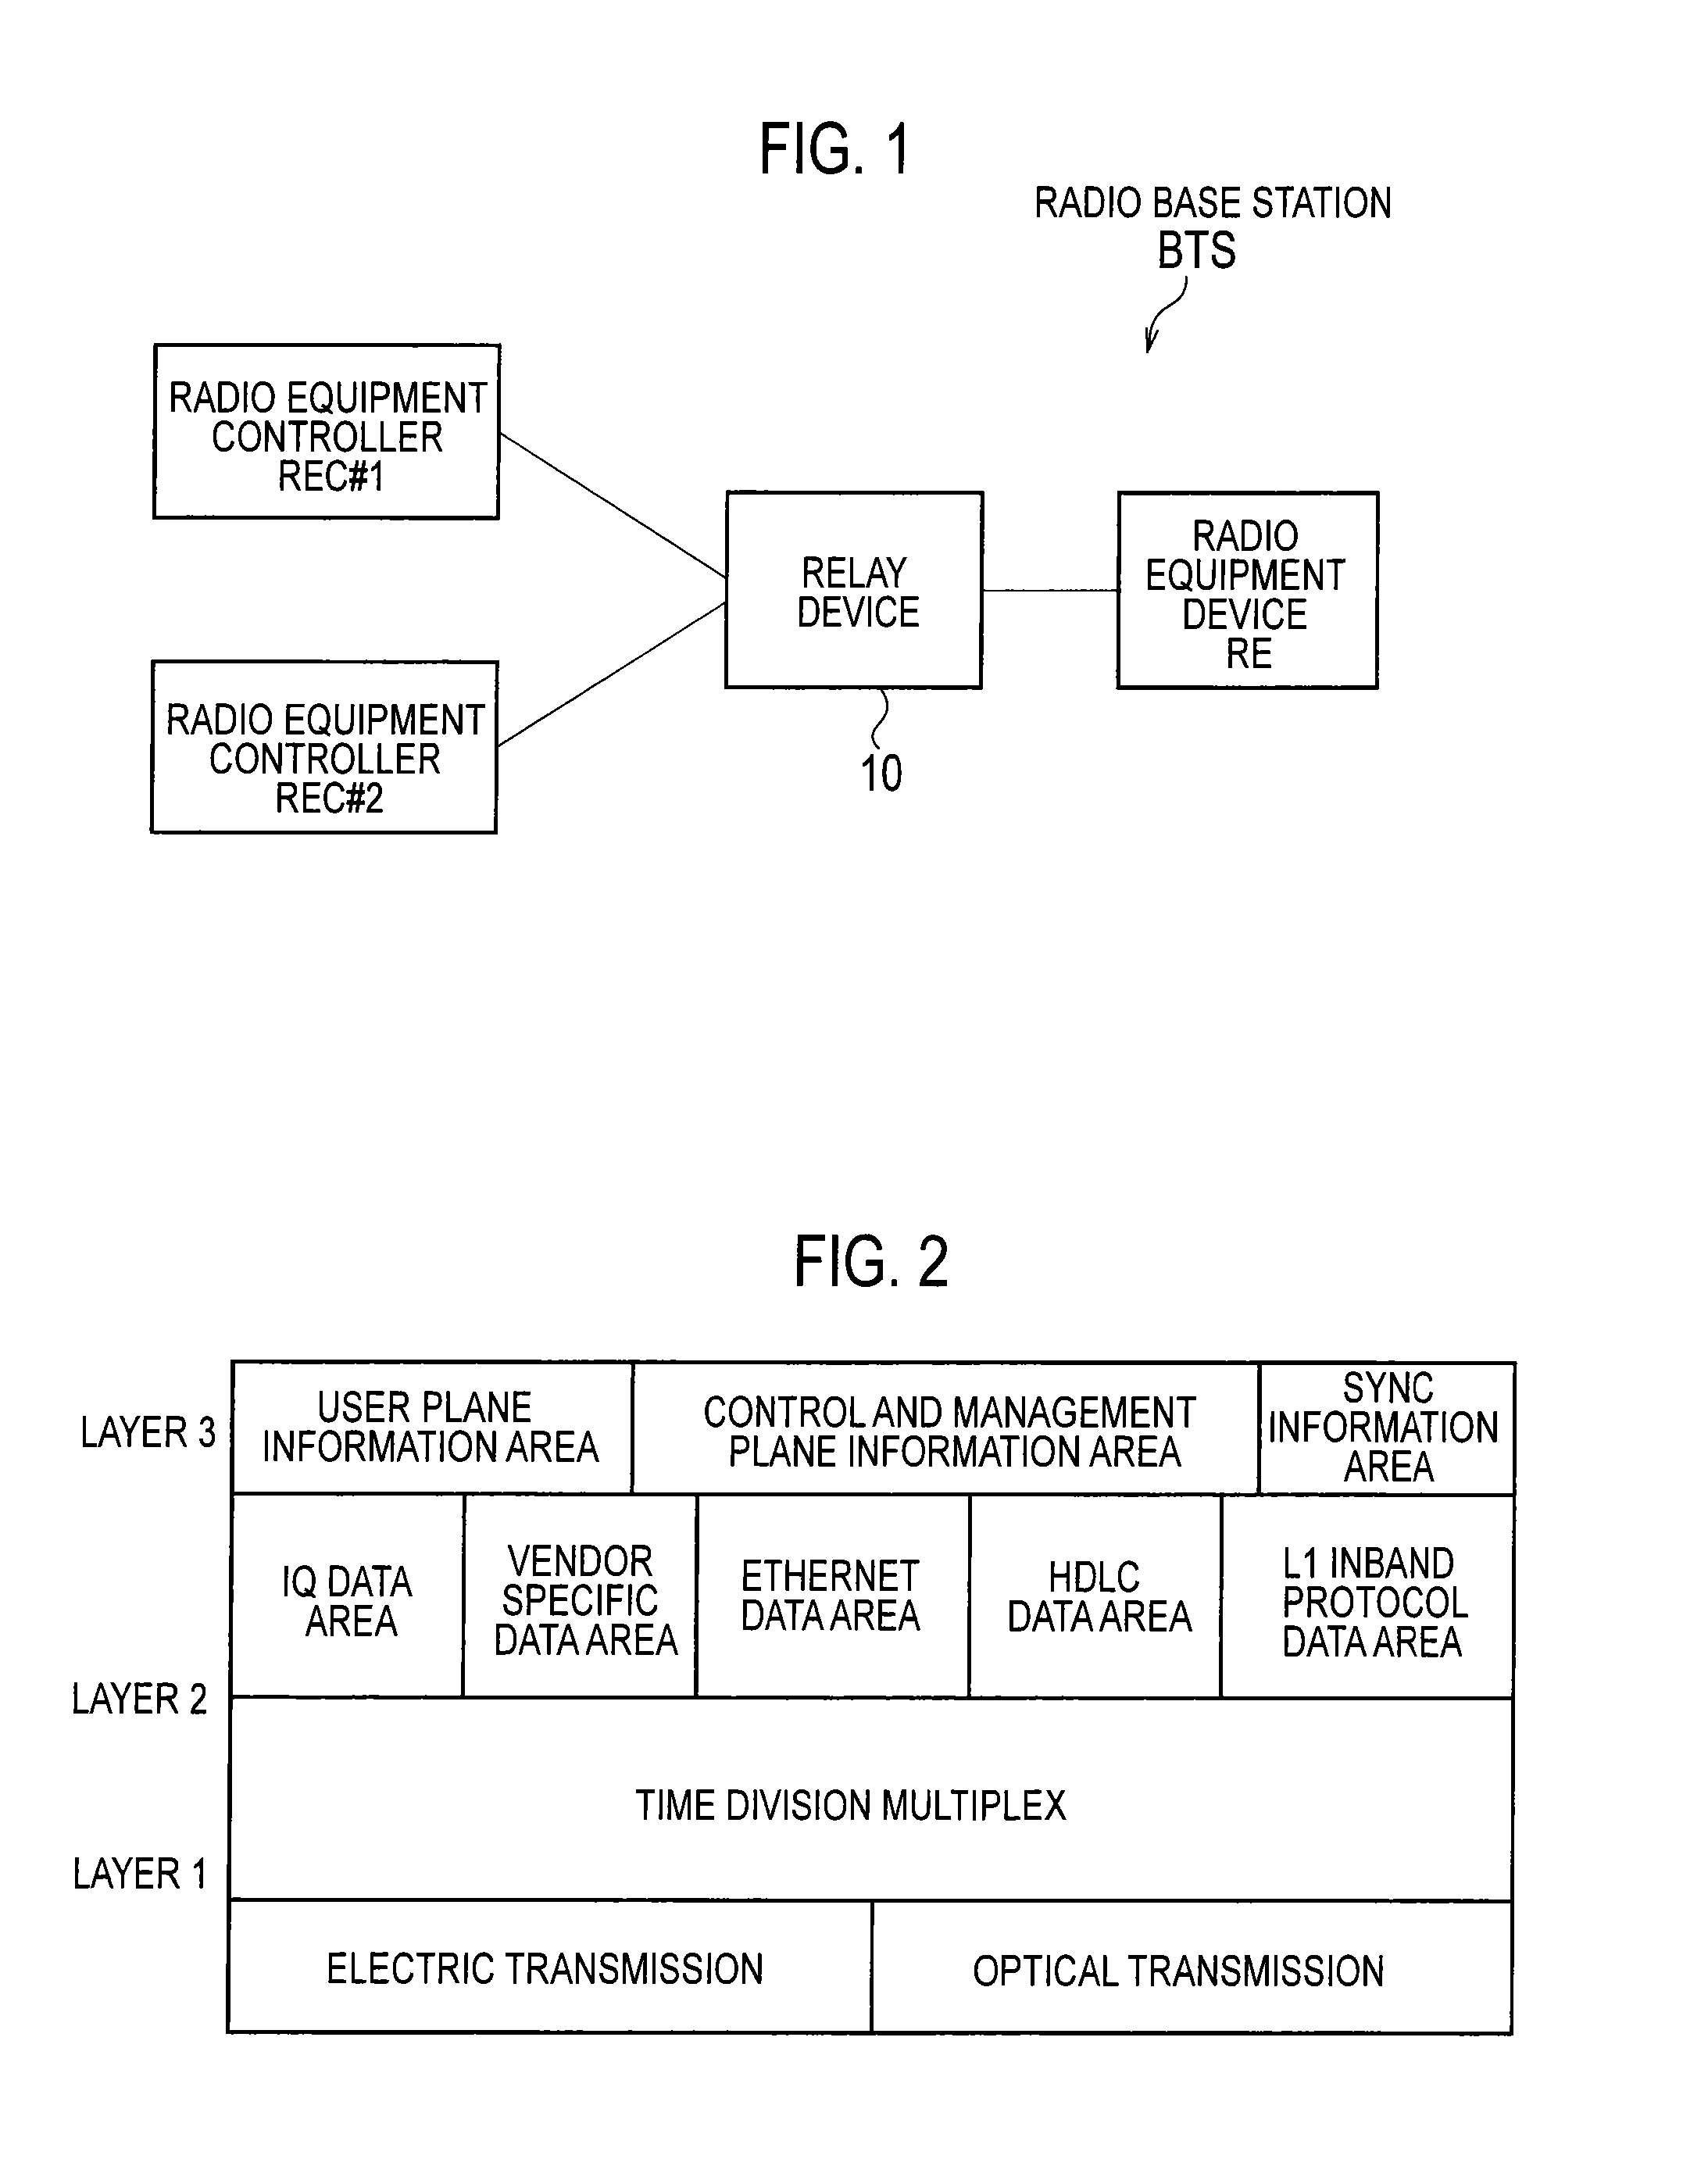 Radio base station and relay device